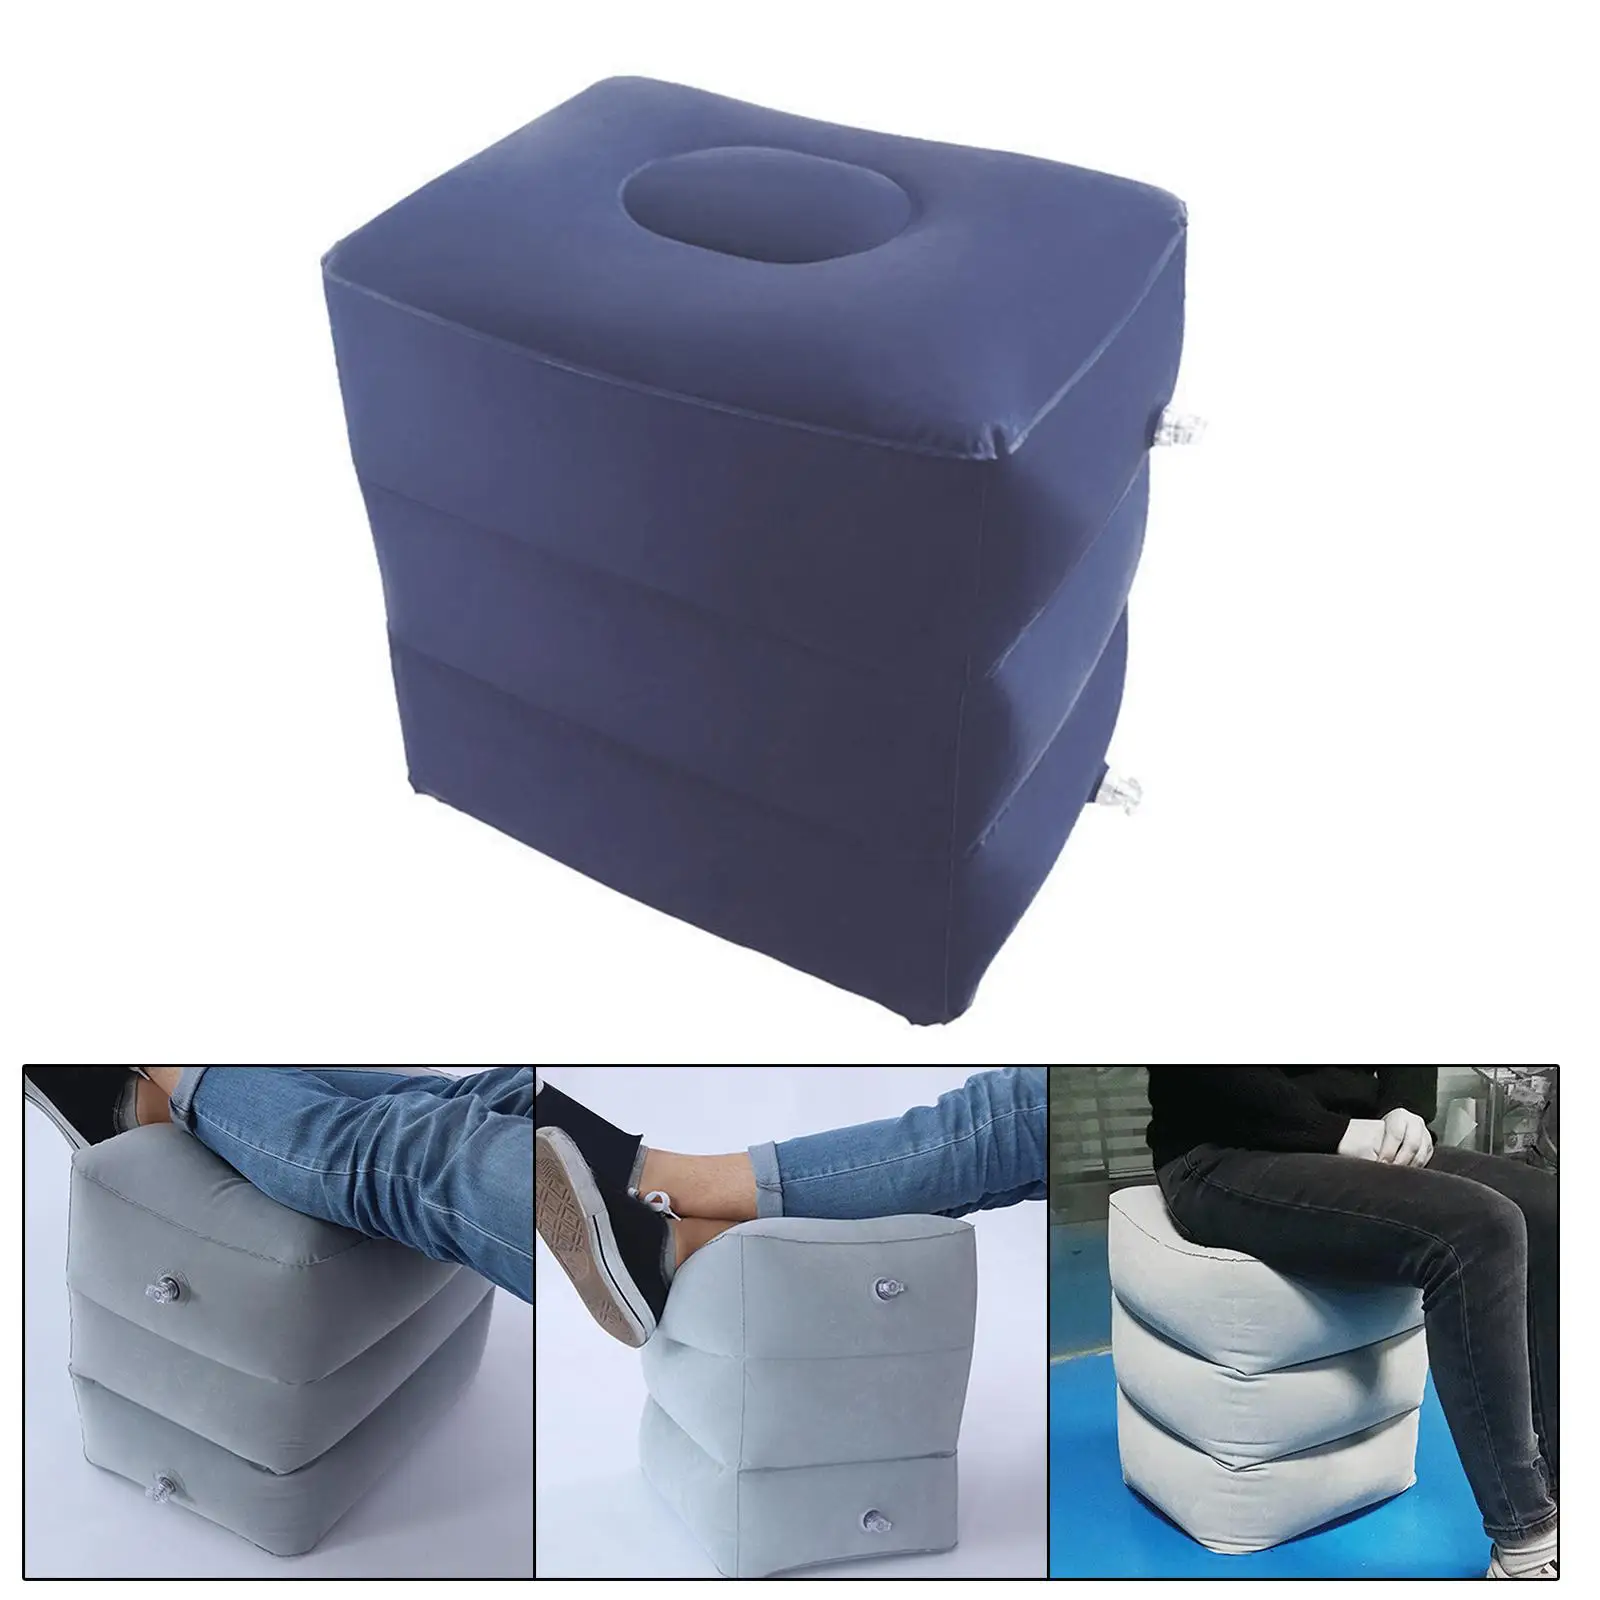 Foot Rest Pillow Adjustable Height Cushion Portable Foot Stool Bed Inflatable Foot Rest for Airplanes Travel Accessory Office